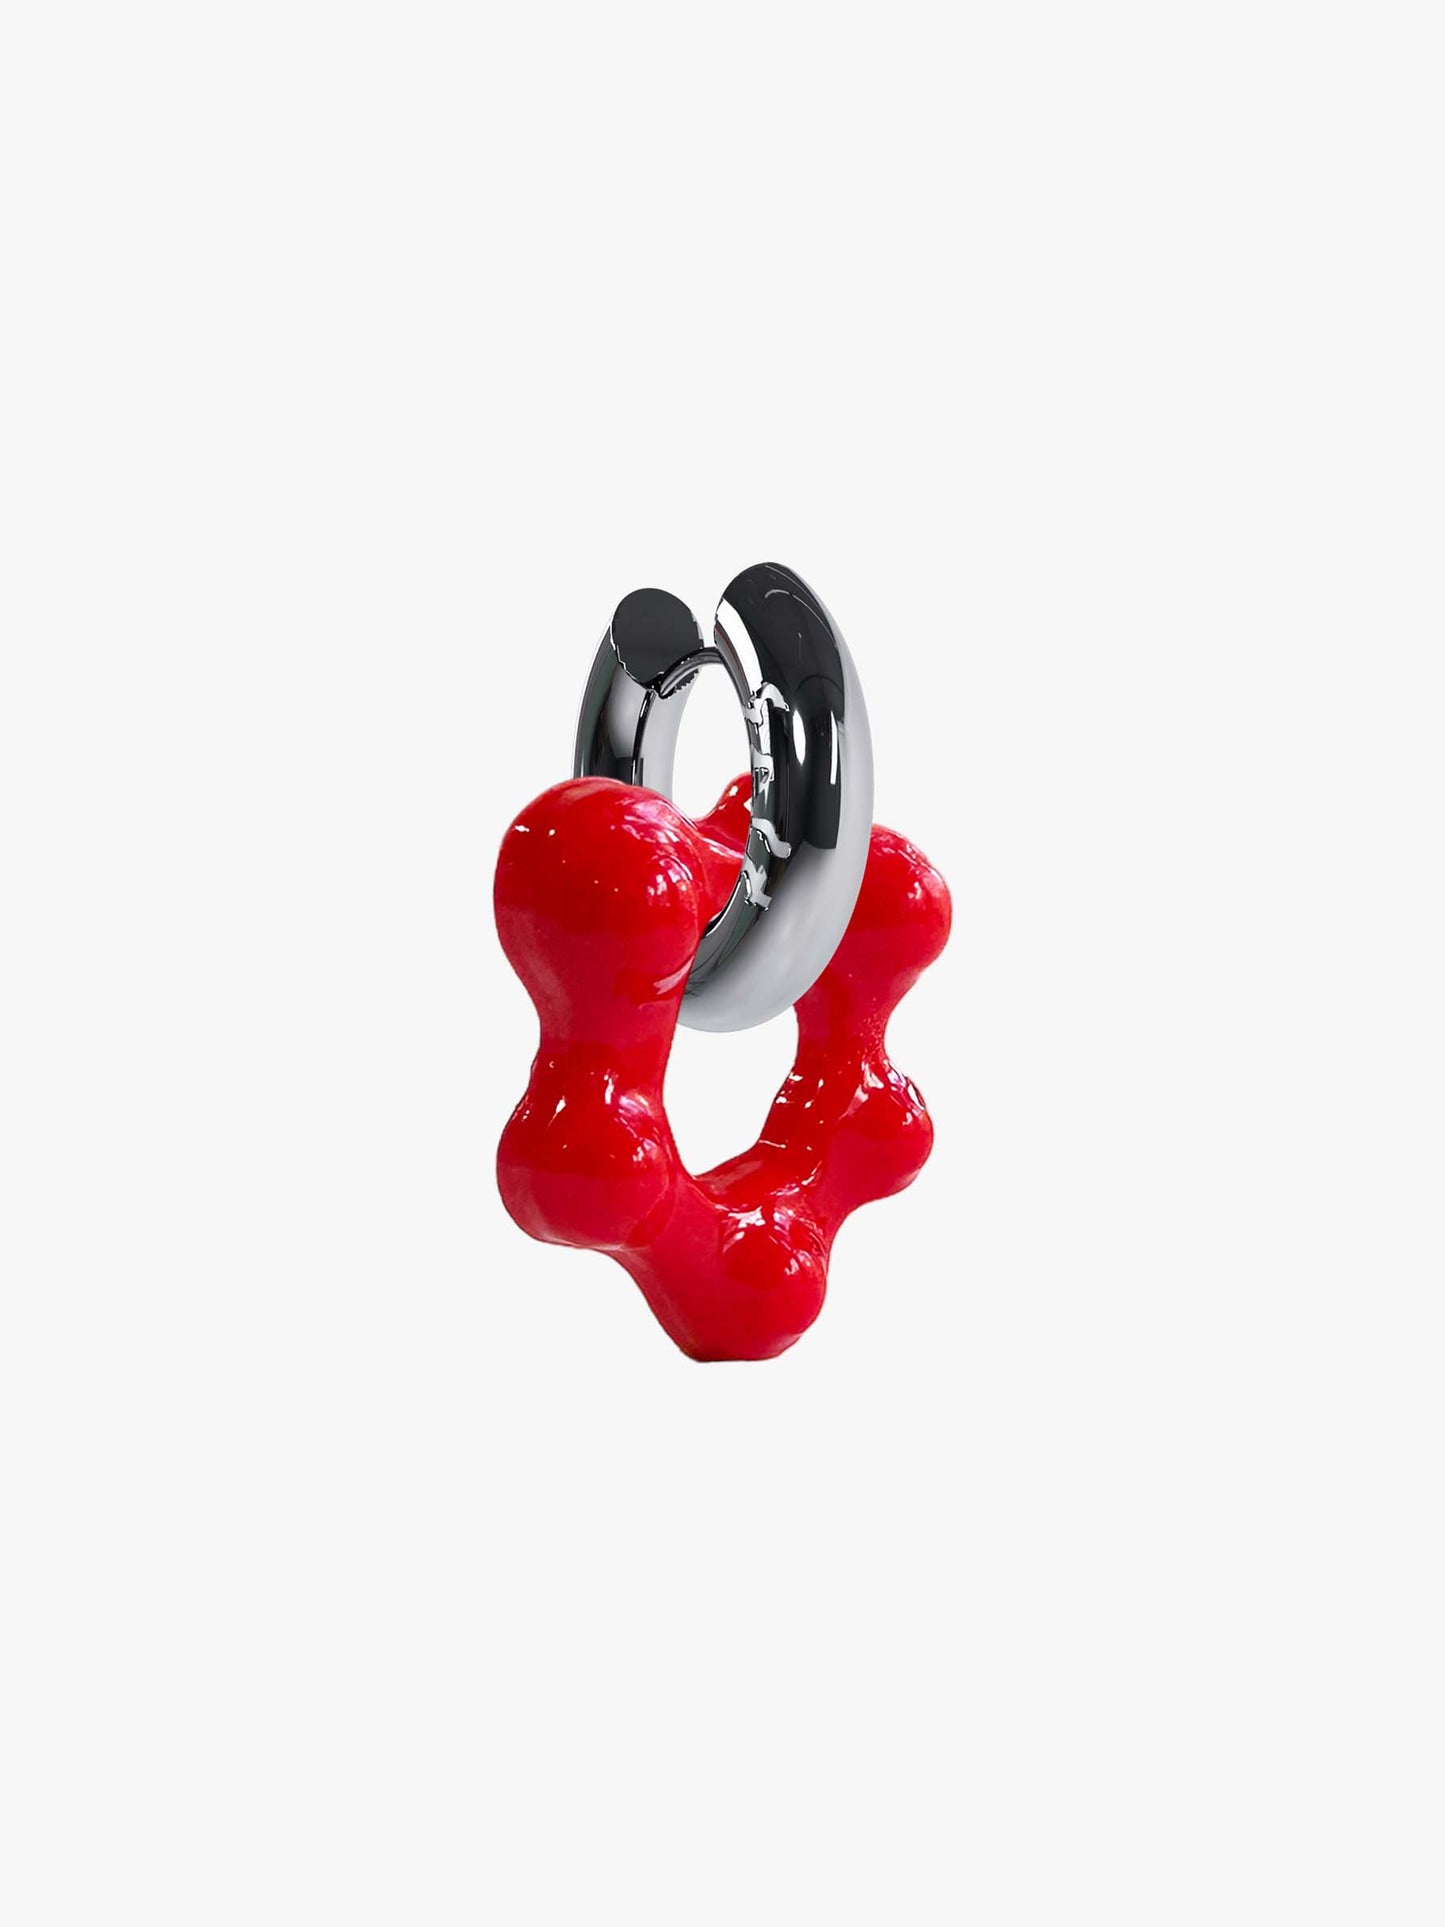 Oyo red silver earring (pair)